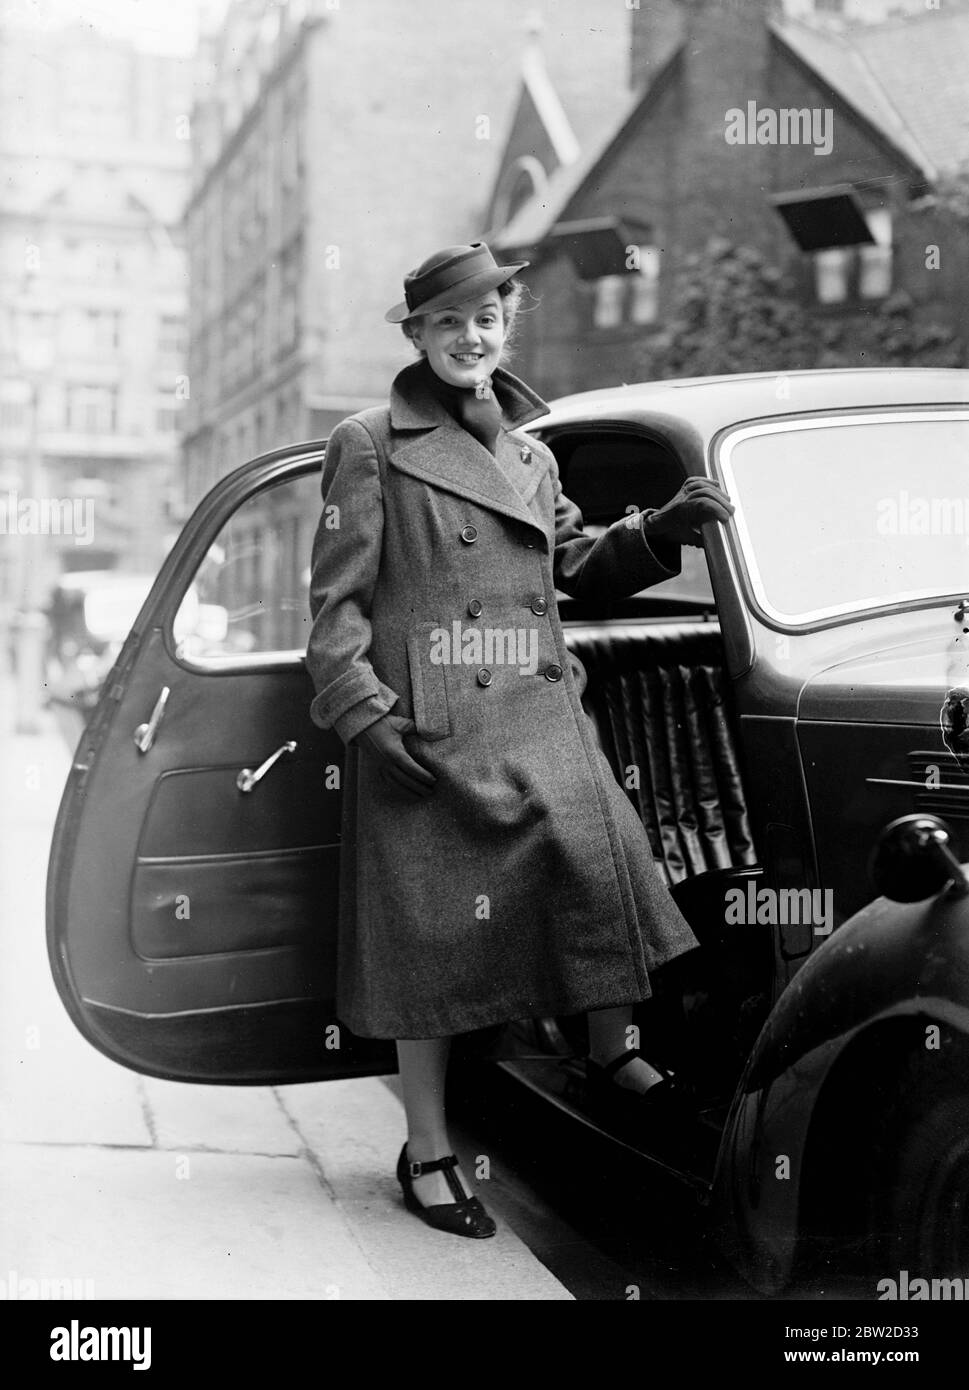 An overcoat and hat, approved officially by the Women's Voluntary Services for Civil Defence for the use of its members were shown at the offices of the Women's Voluntary Services in Tothill Street, London. Photo shows: The new overcoat and hat worn by Mrs John Dunlop, one of the early volunteer. 28 June 1939 Stock Photo